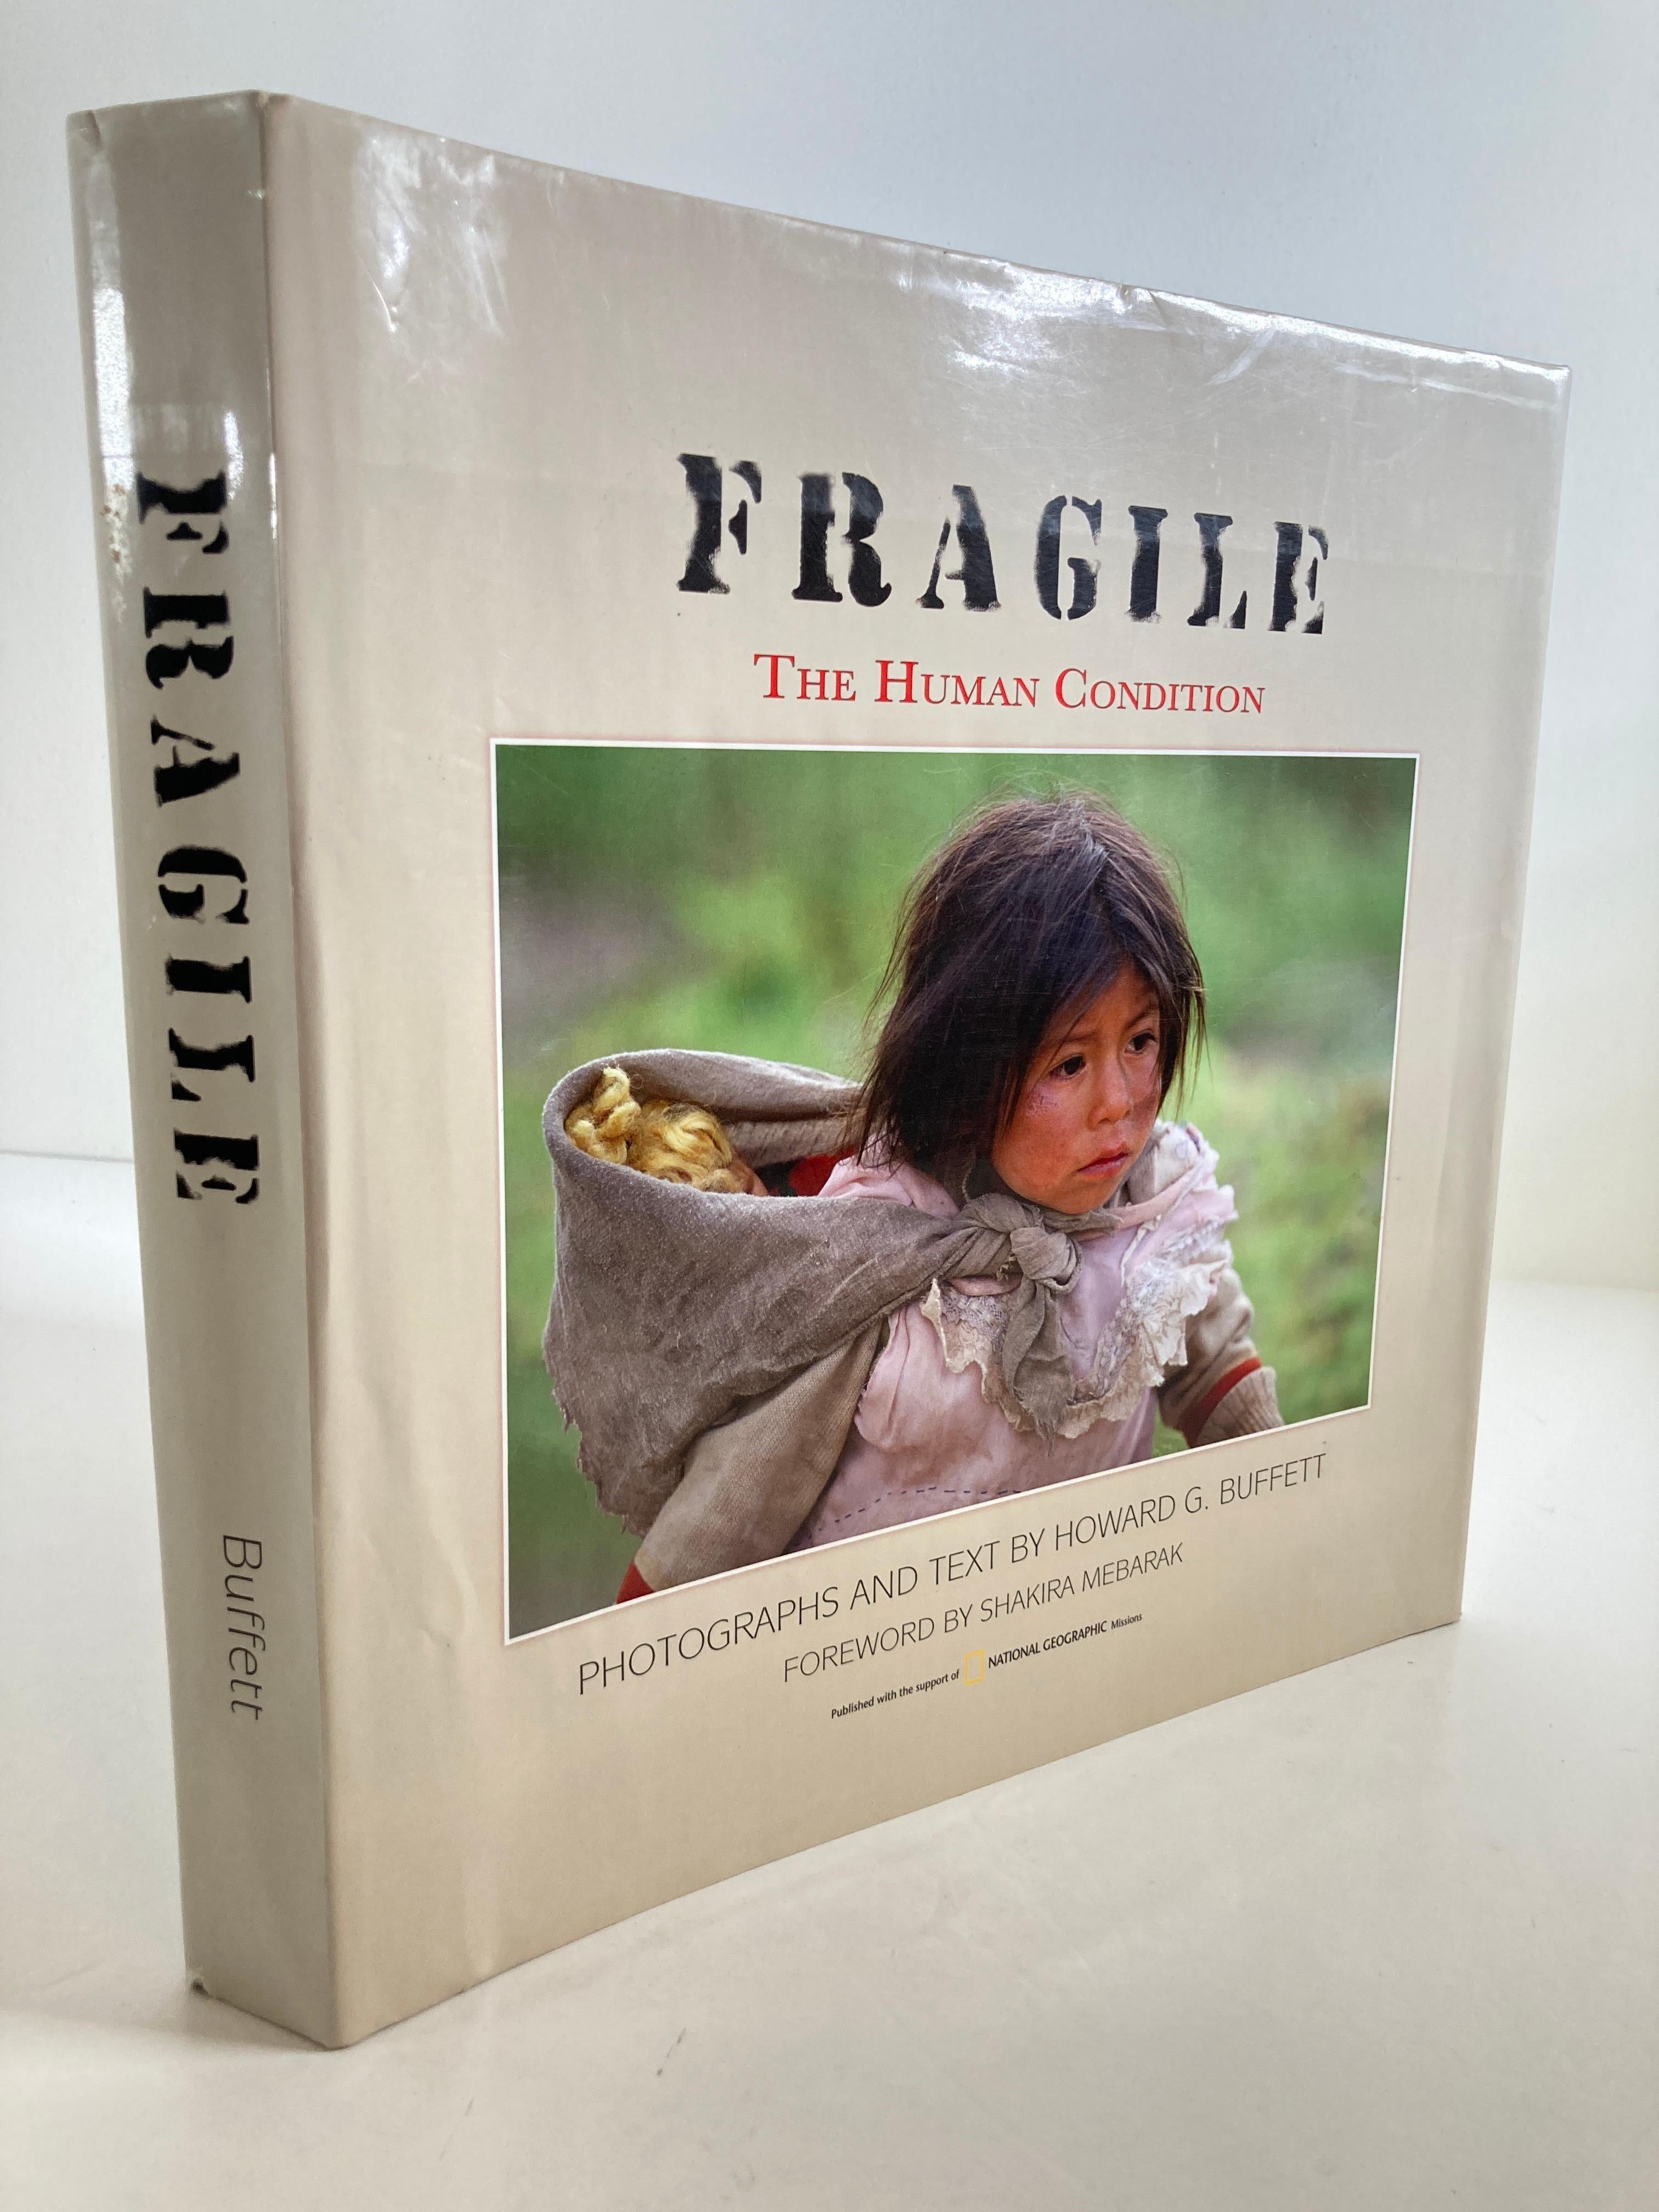 FRAGILE: The Human Condition Hardcover book
 Illustrated, December 8, 2009
by Howard G. Buffett (Author), Shakira Mebarak (Foreword)
Fragile is the documentation of life stories in sixty-five countries. It is about personal accounts, some